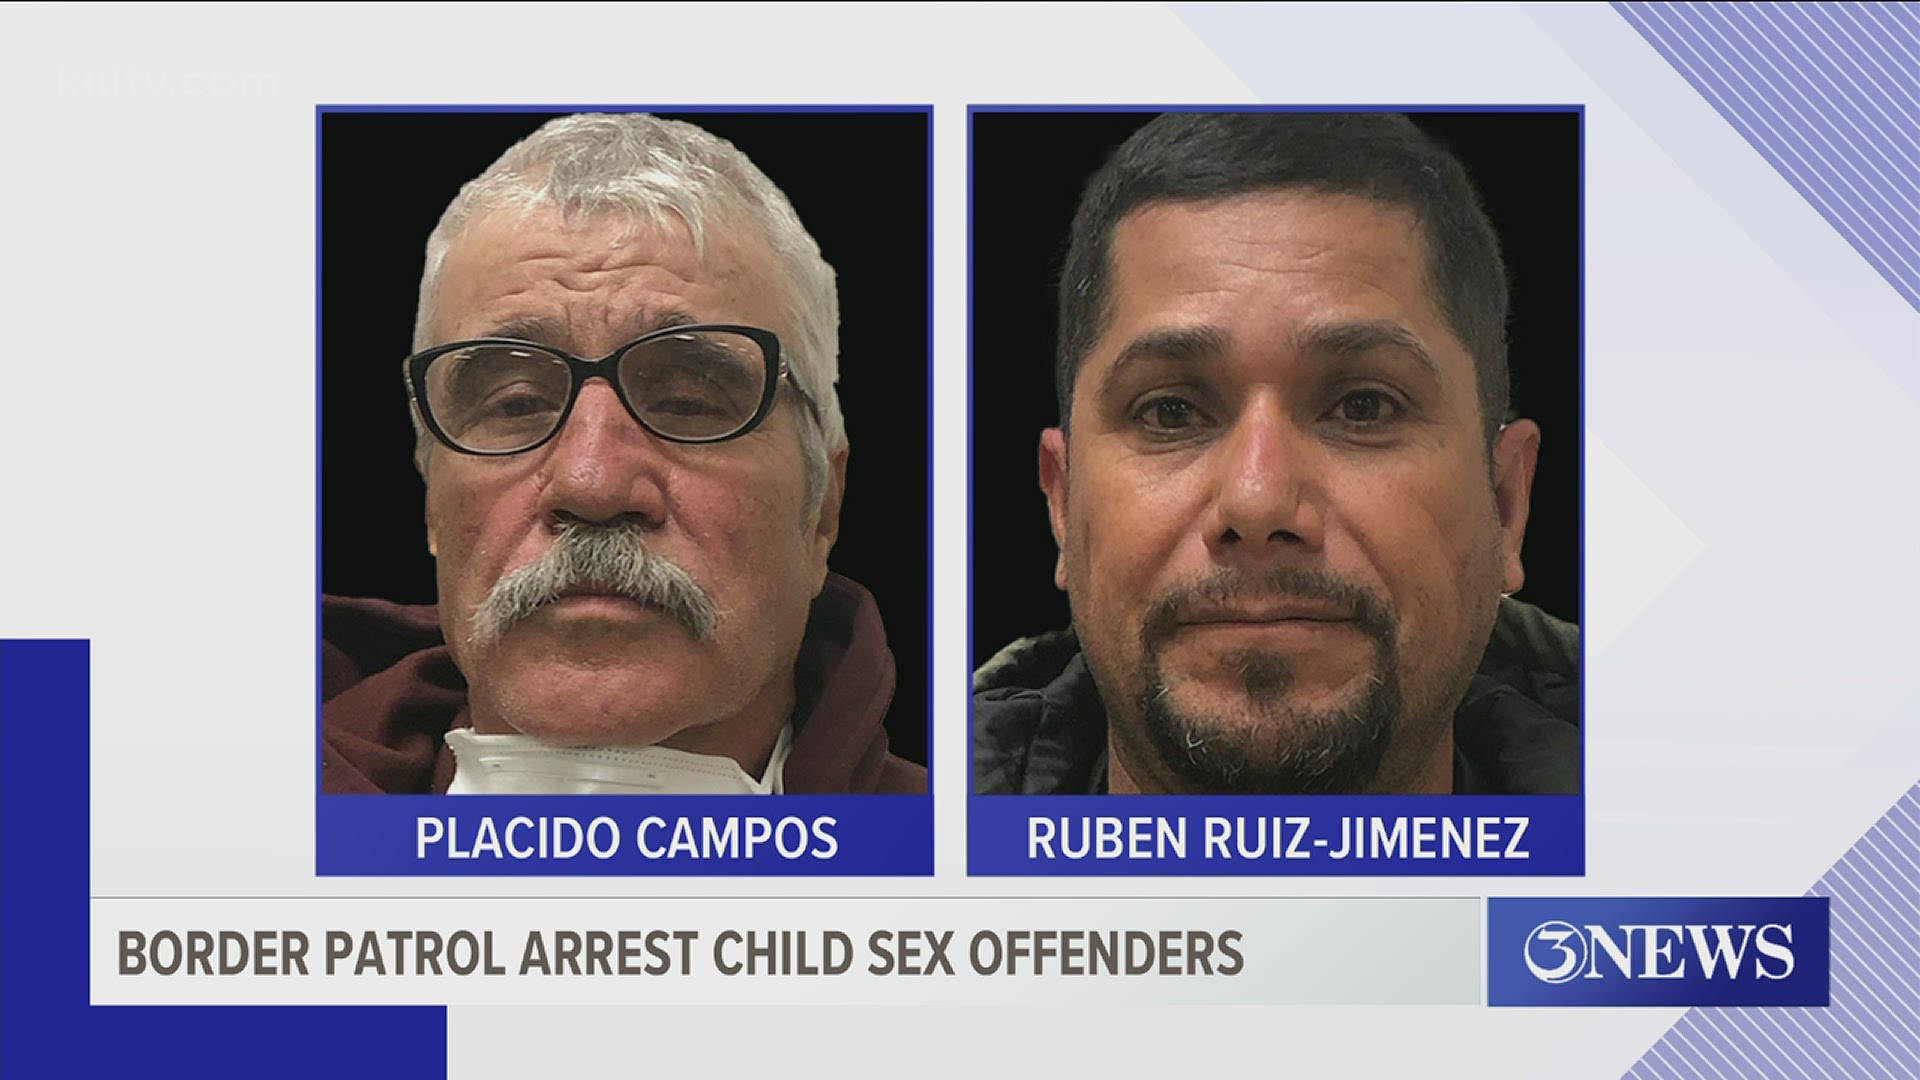 Both child sex offenders are being held by the U.S. Border Patrol pending prosecution of their immigration violations.